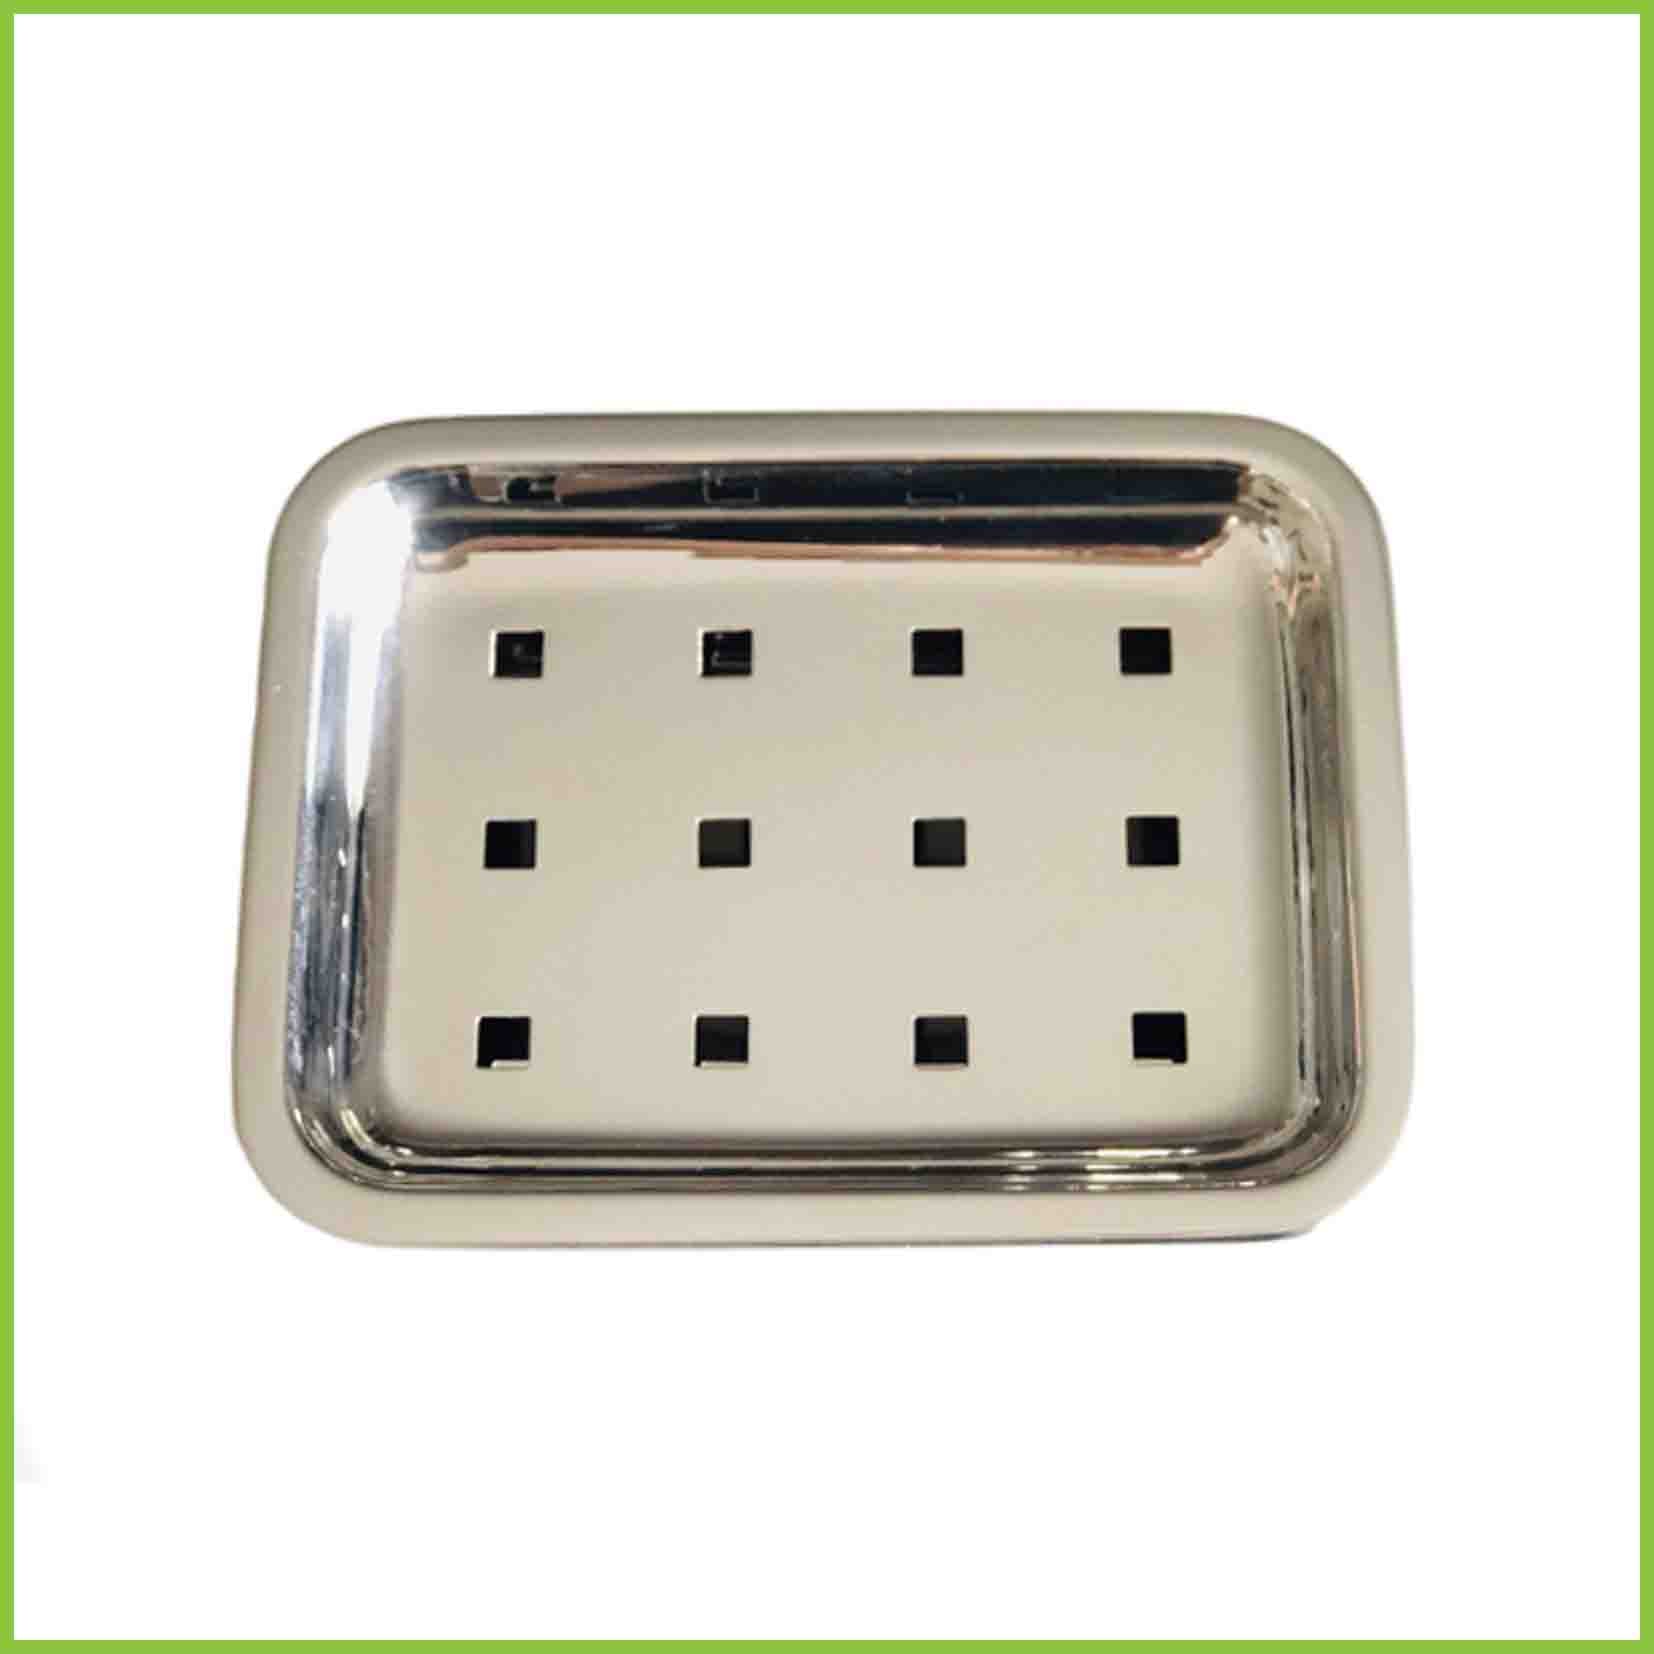 Stainless steel soap dish with hole in the upper tray.